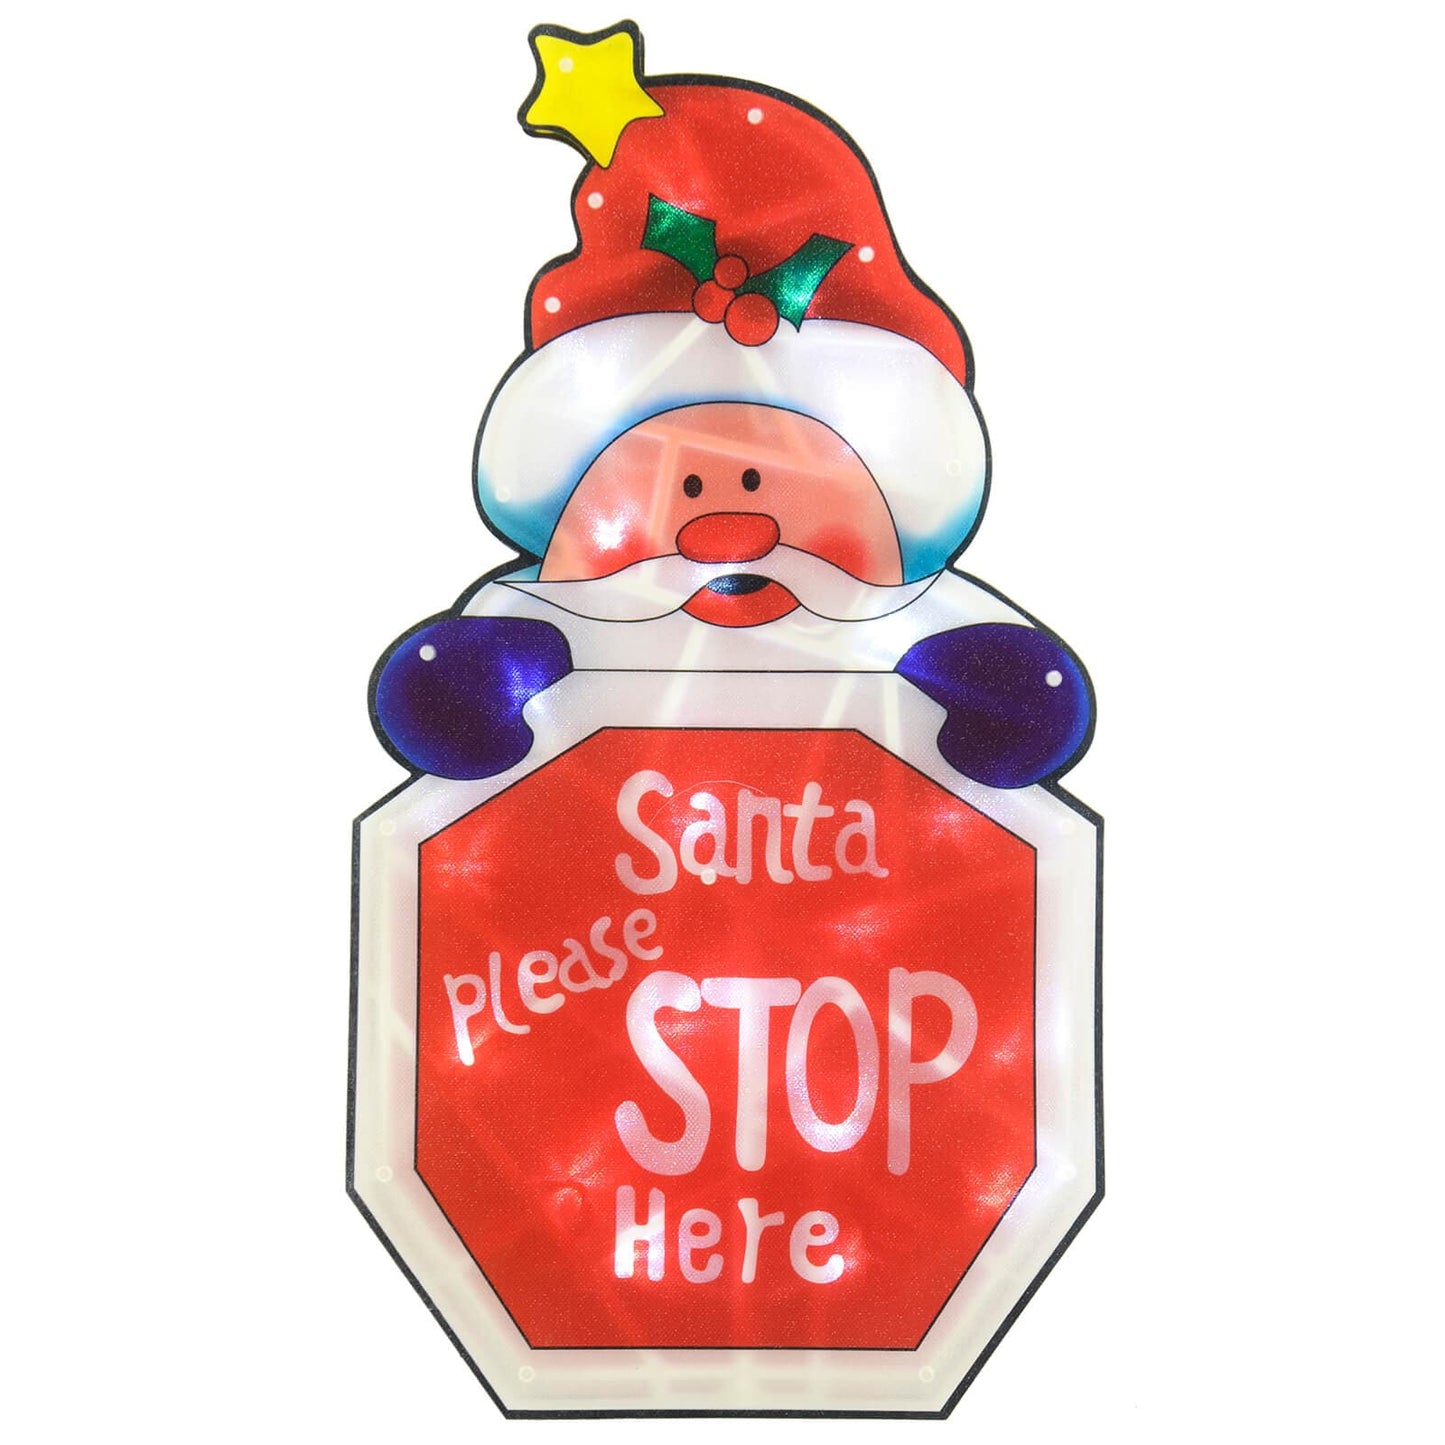 LED Christmas window silhouette light up decoration featuring Santa holding a Santa please stop here sign in red and white